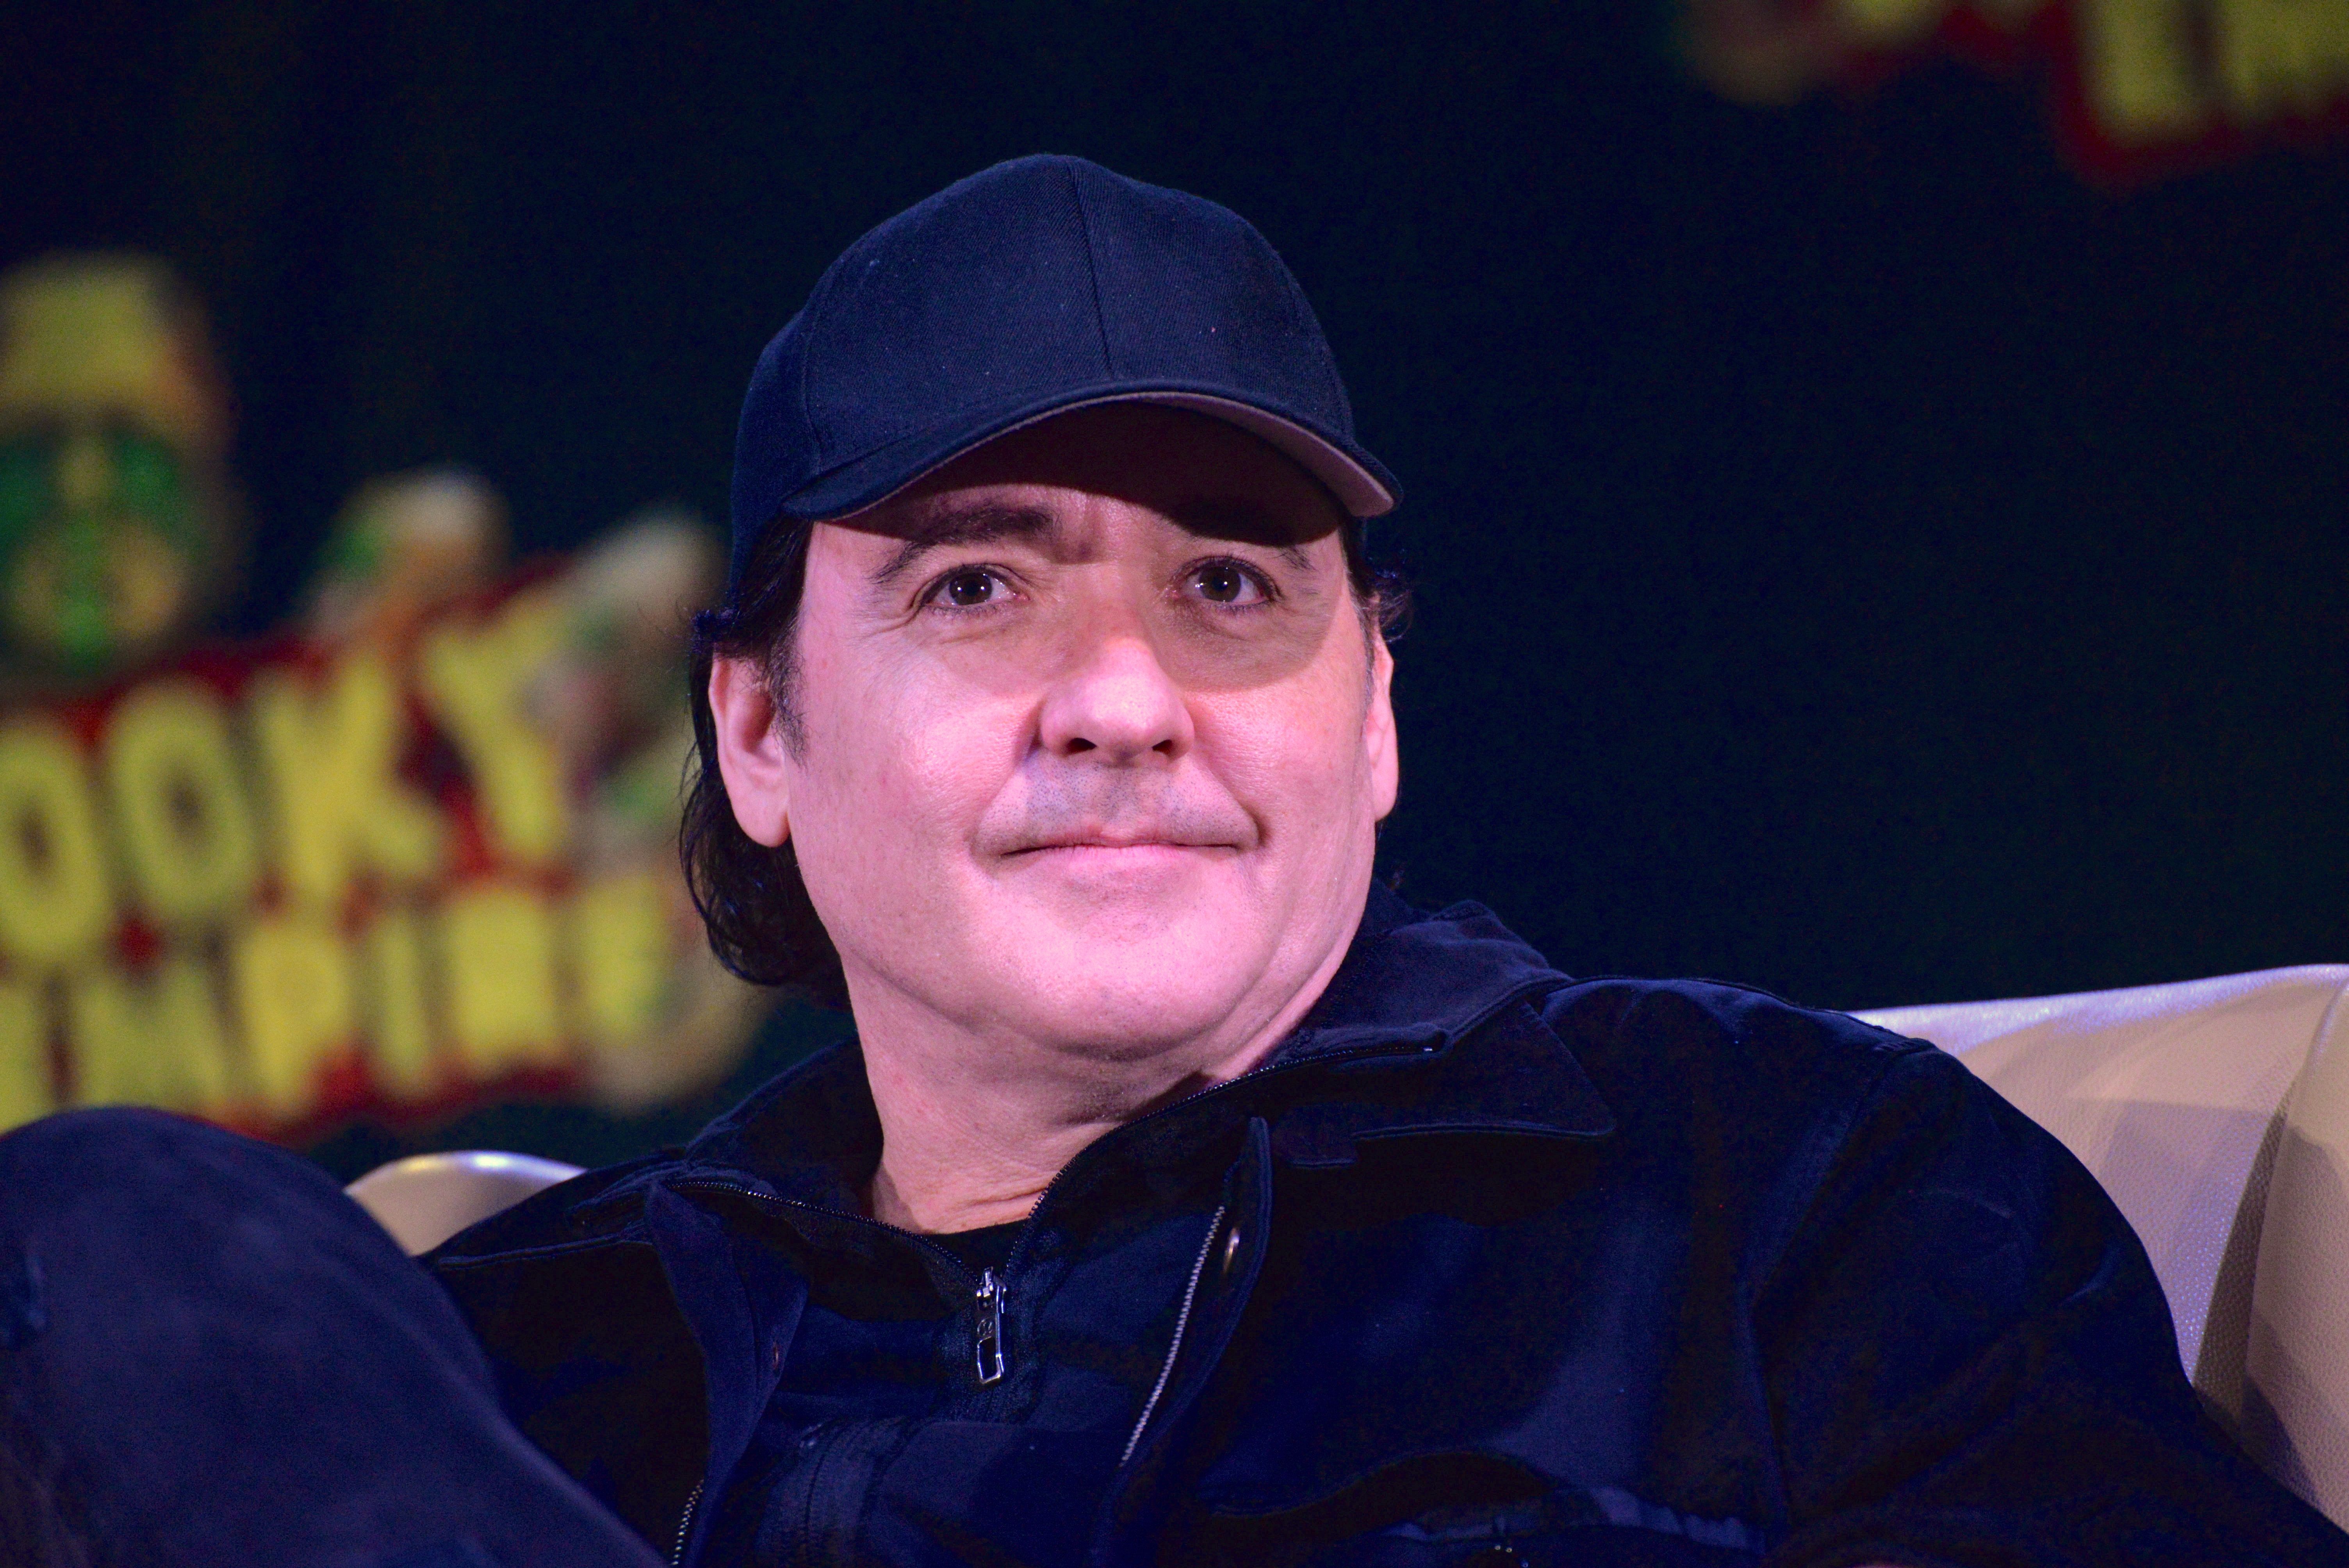 John Cusack during the Spooky Empire Horror Convention at the Hyatt Regency on October 28, 2017 in Orlando, Florida. | Source: Getty Images